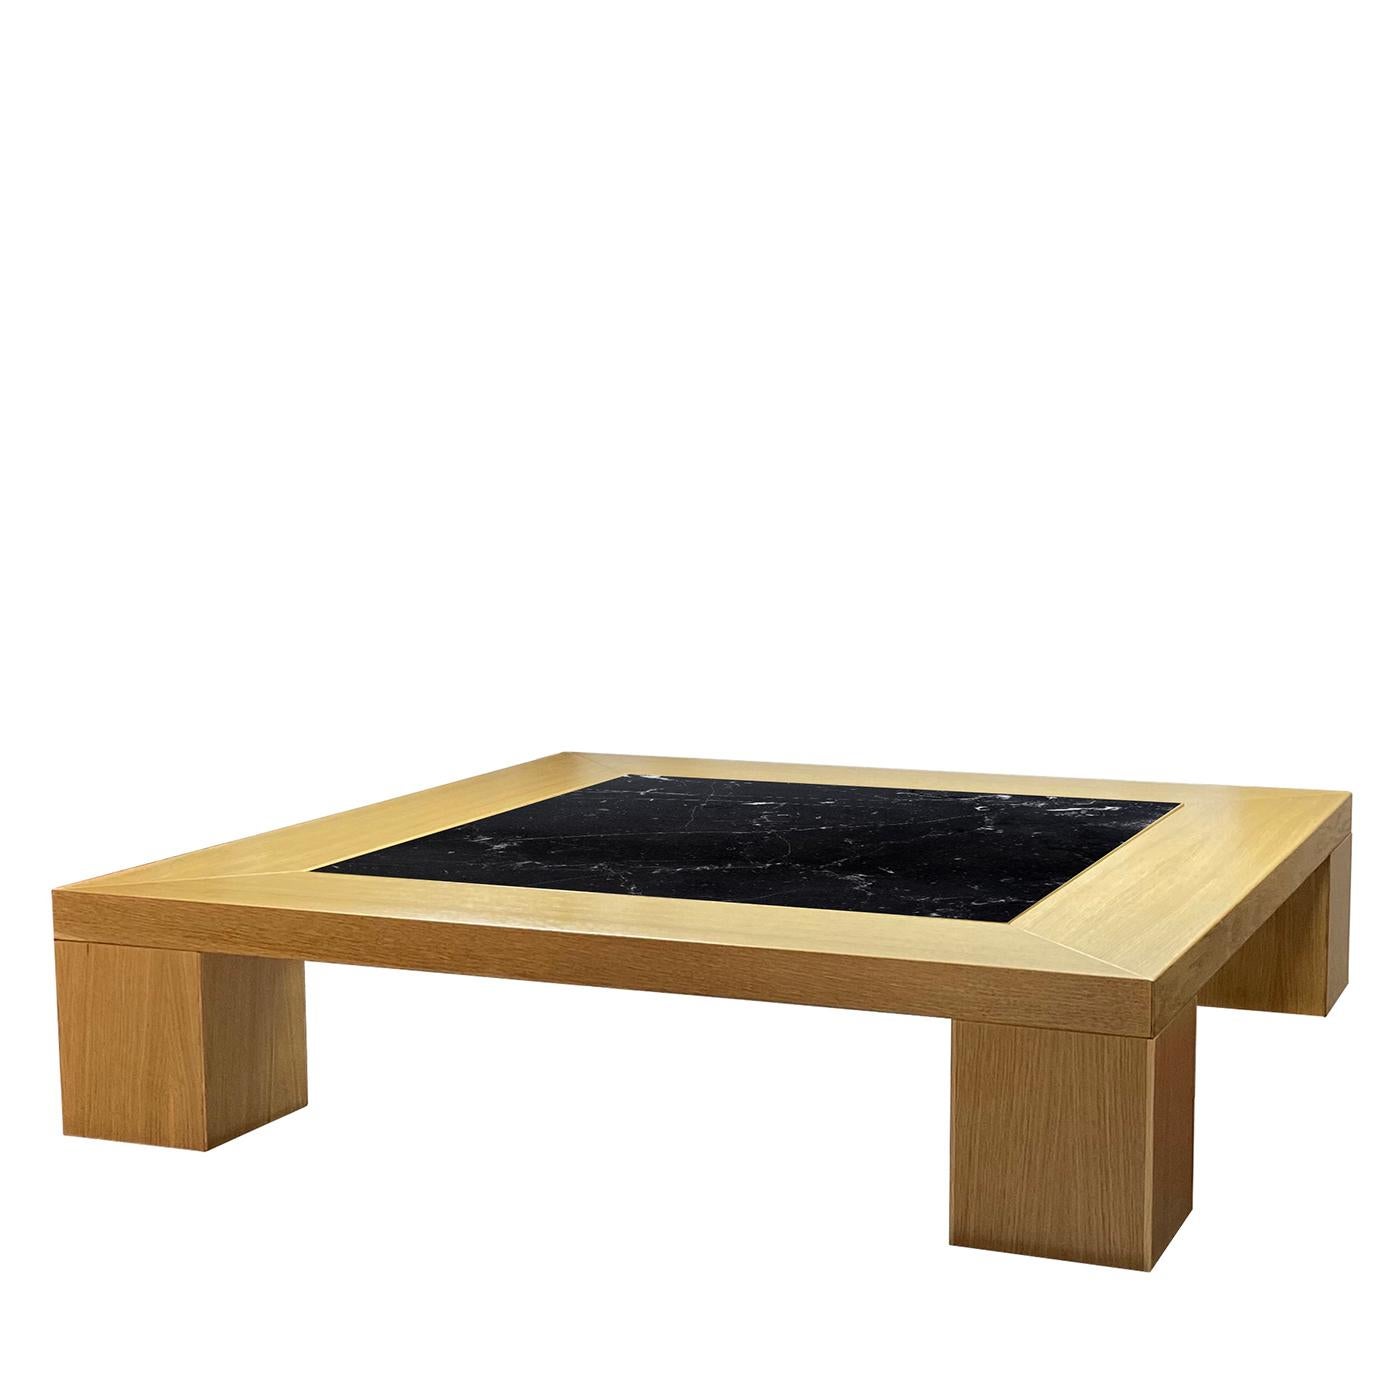 A bold accent piece adding character and functionality to a luxe modern space, this square coffee table is an exercise in geometric rigor and unique traceries drawn by nature. Set in a sturdy durmast frame showcasing singular grain, the black